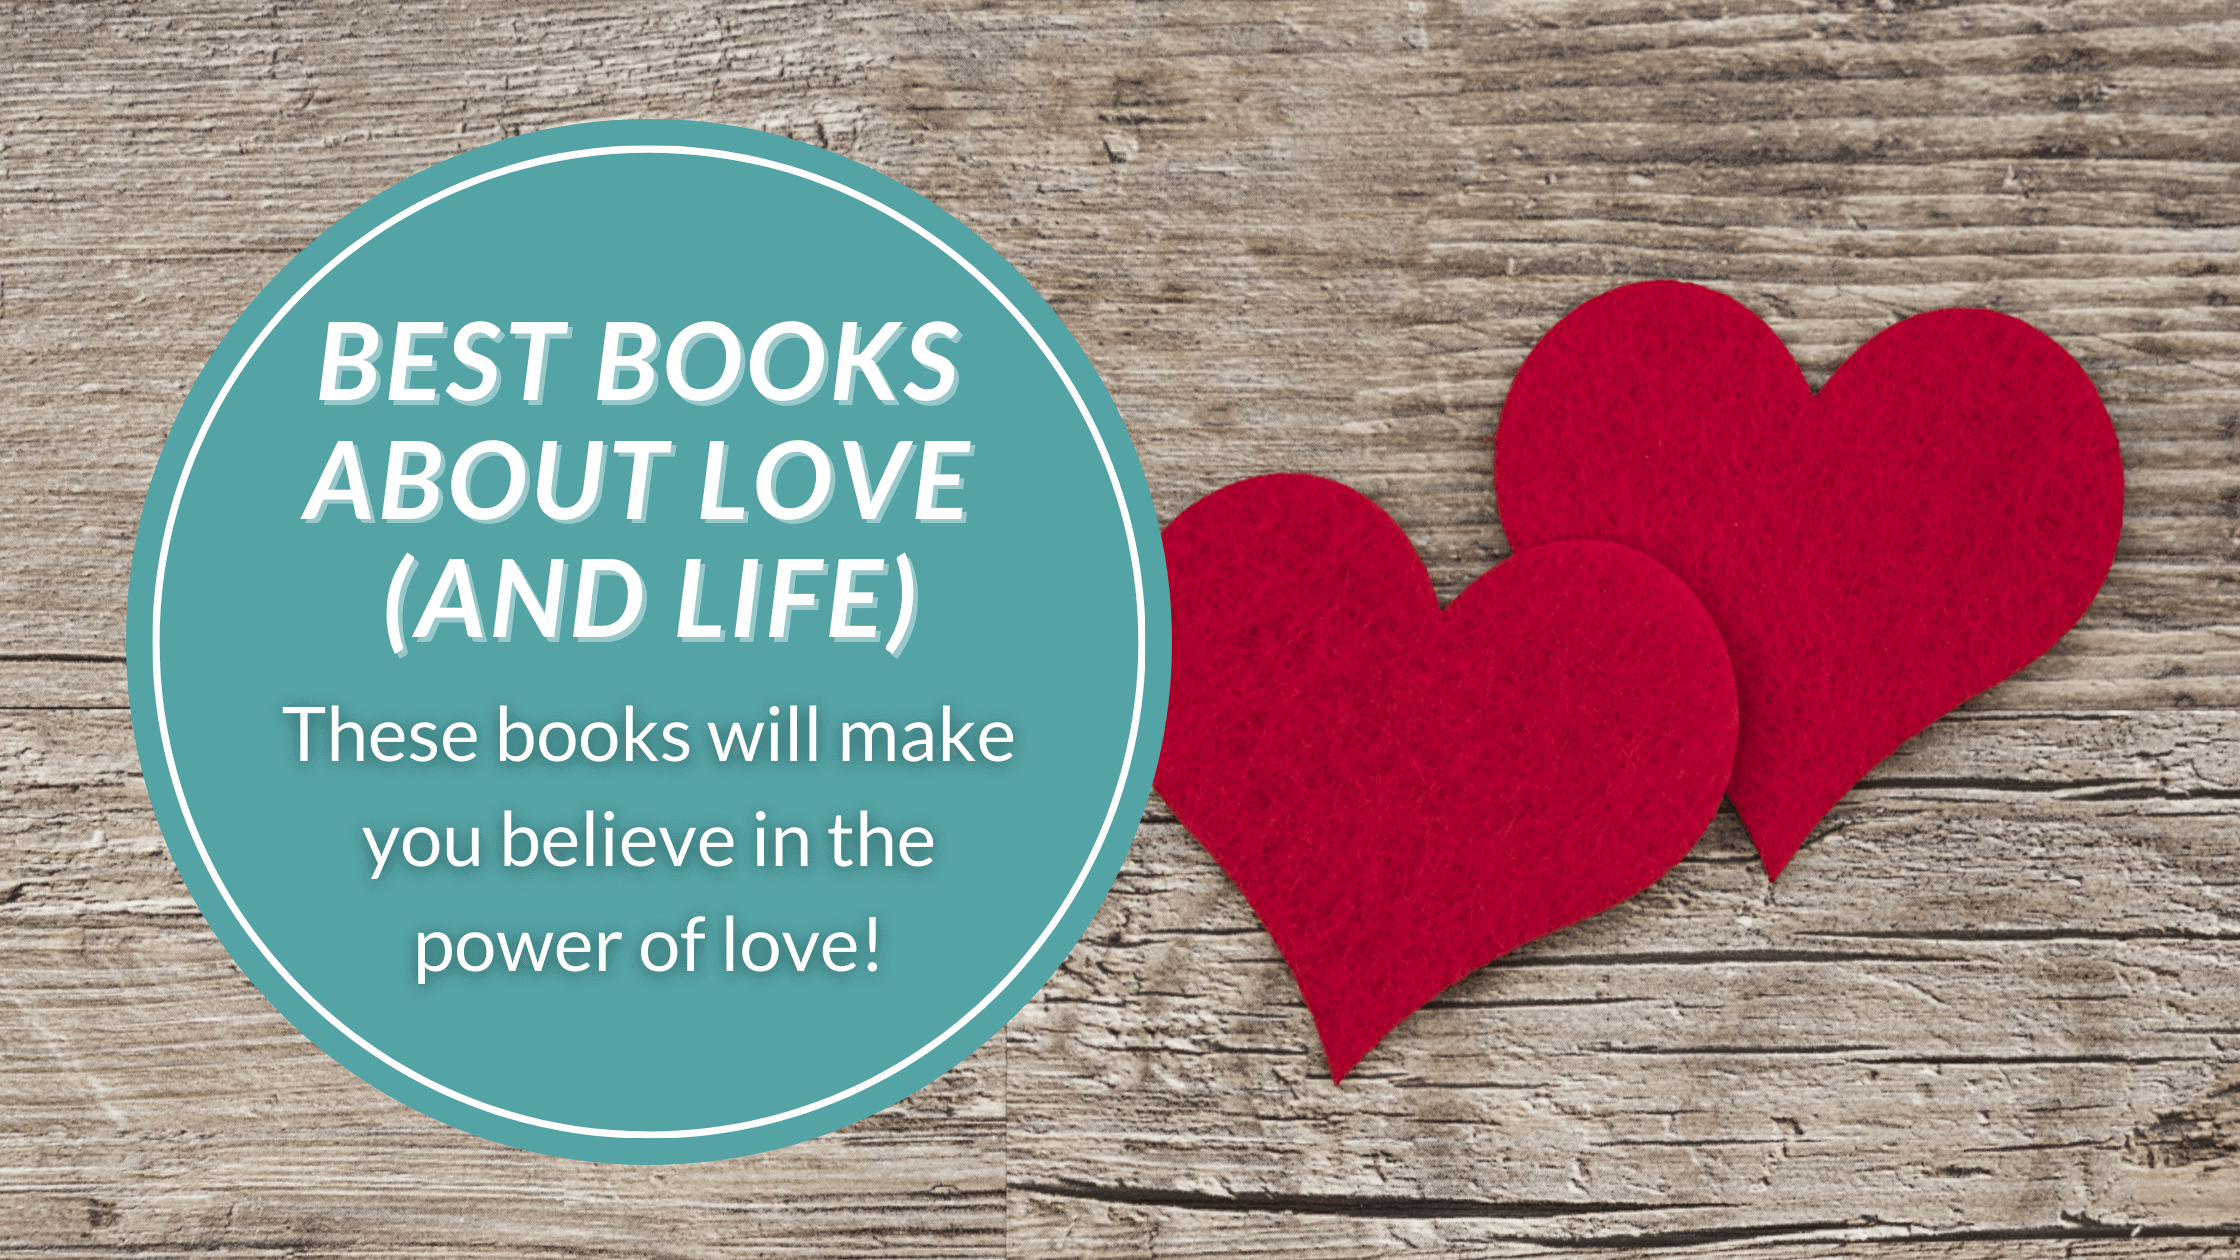 Wood and two felt hearts and the title, "Best books about love and life"